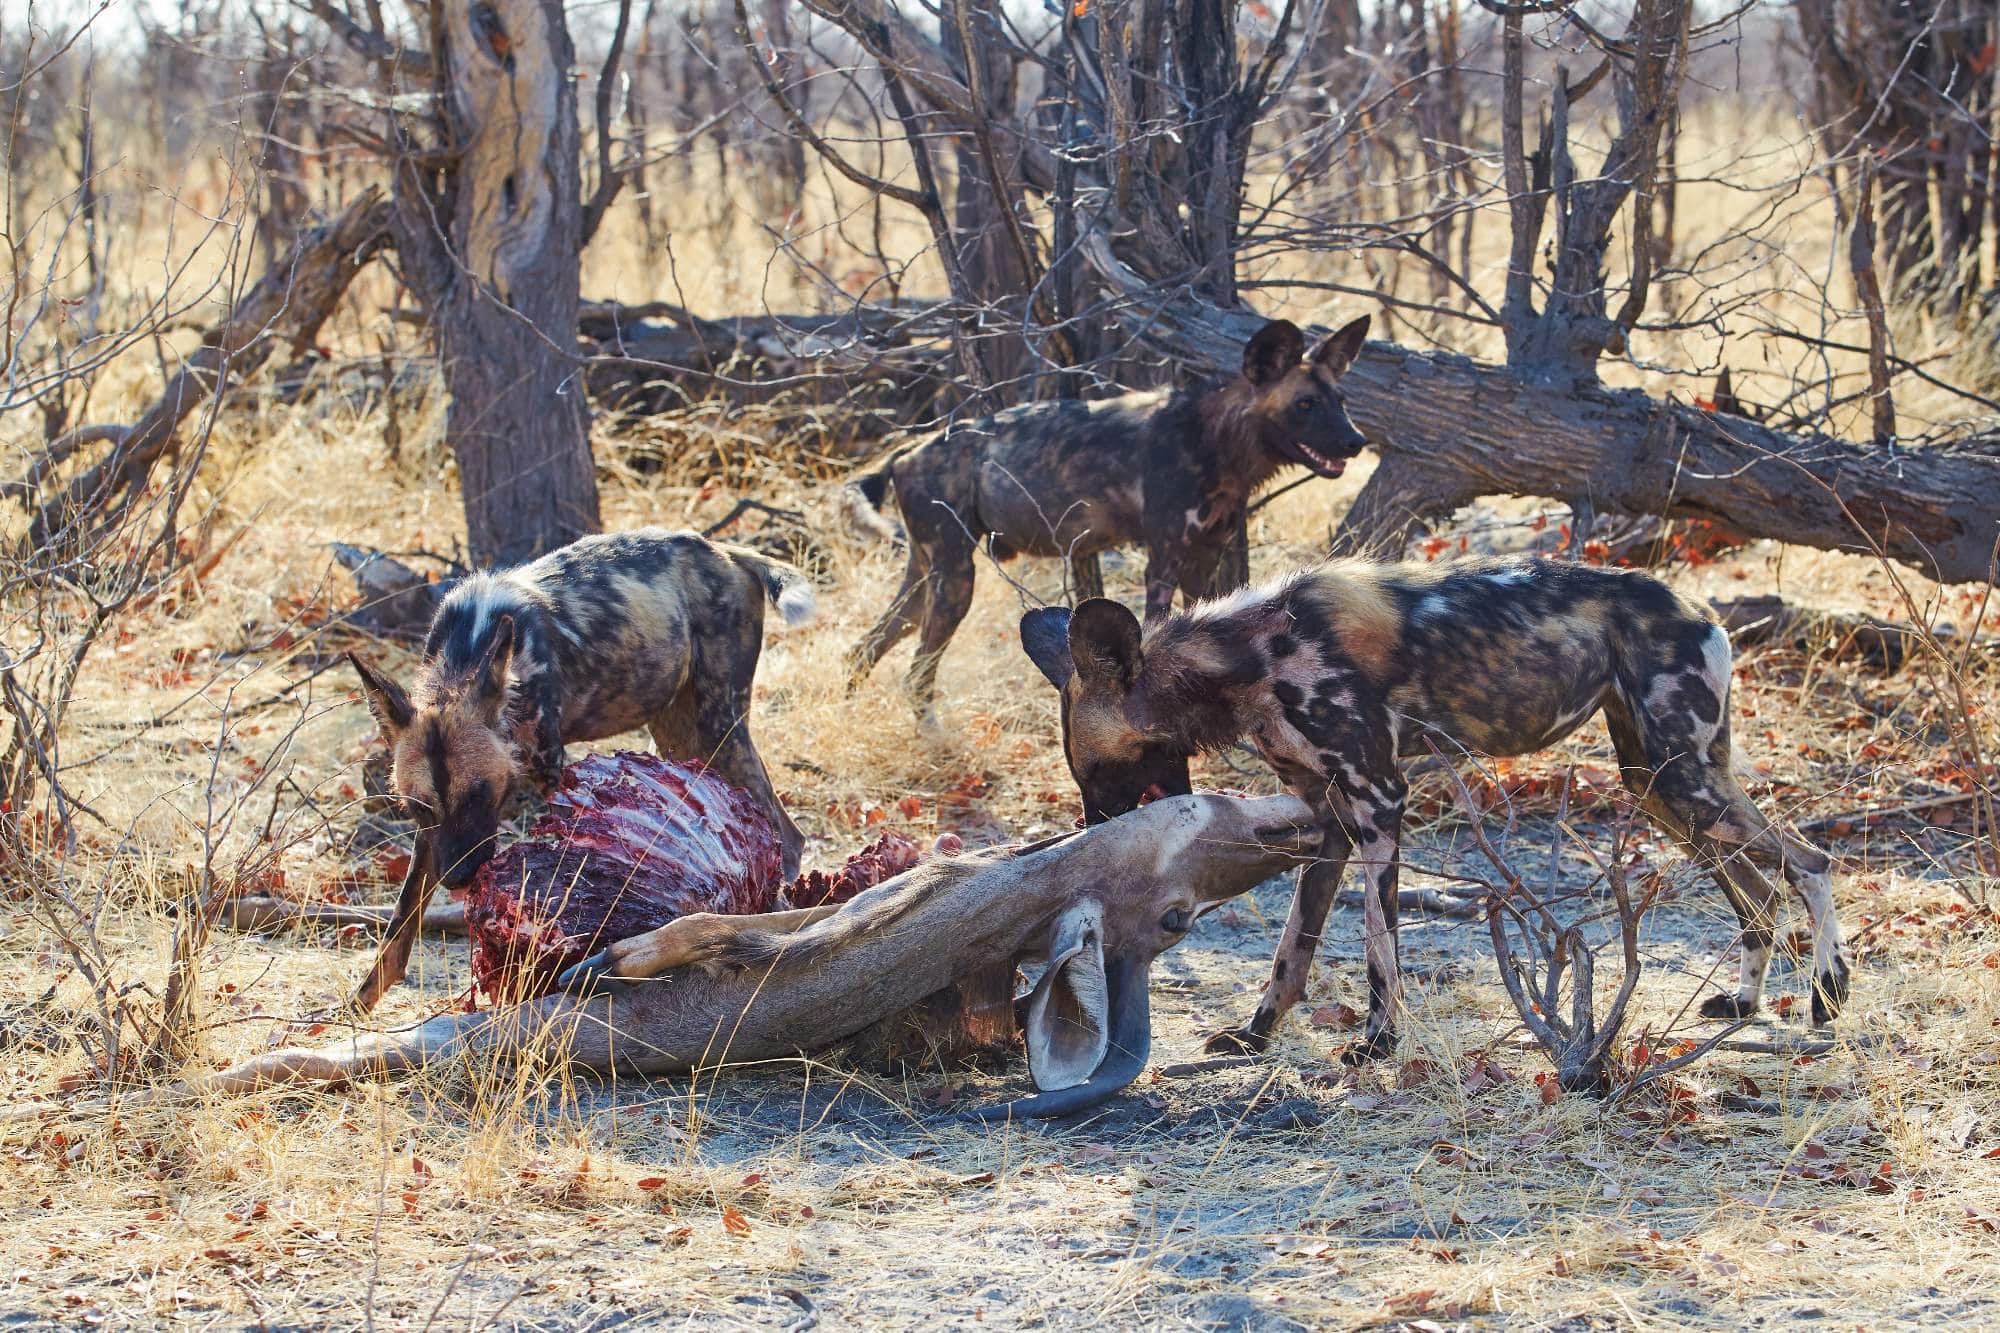 A Photographic Journey to Meet African Wild Dogs – The Continent’s Uncapturable Shadows